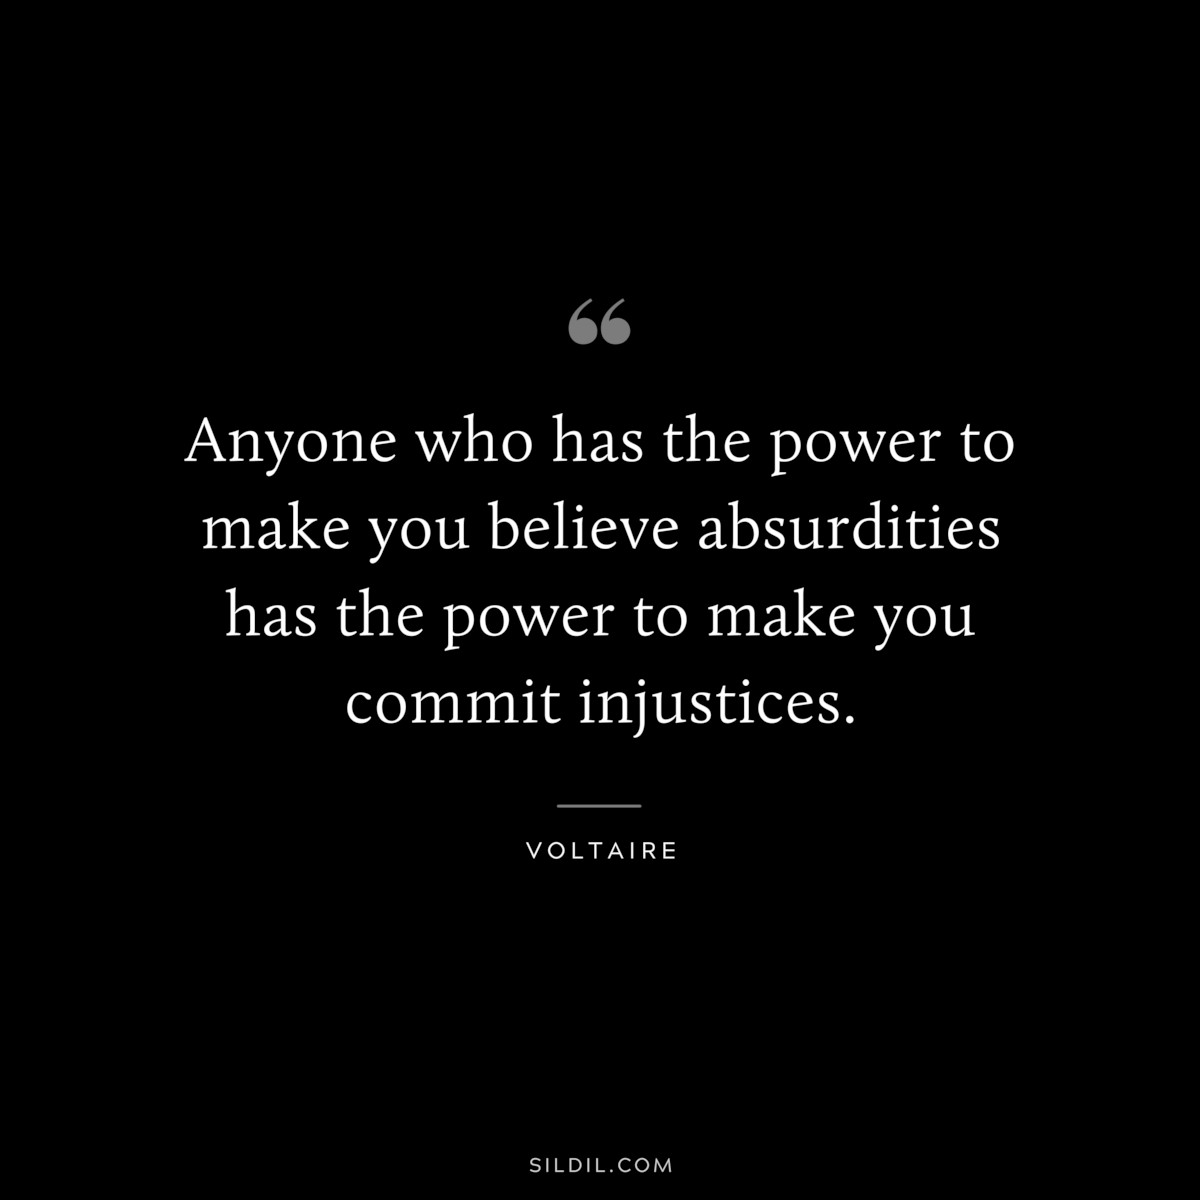 Anyone who has the power to make you believe absurdities has the power to make you commit injustices. ― Voltaire